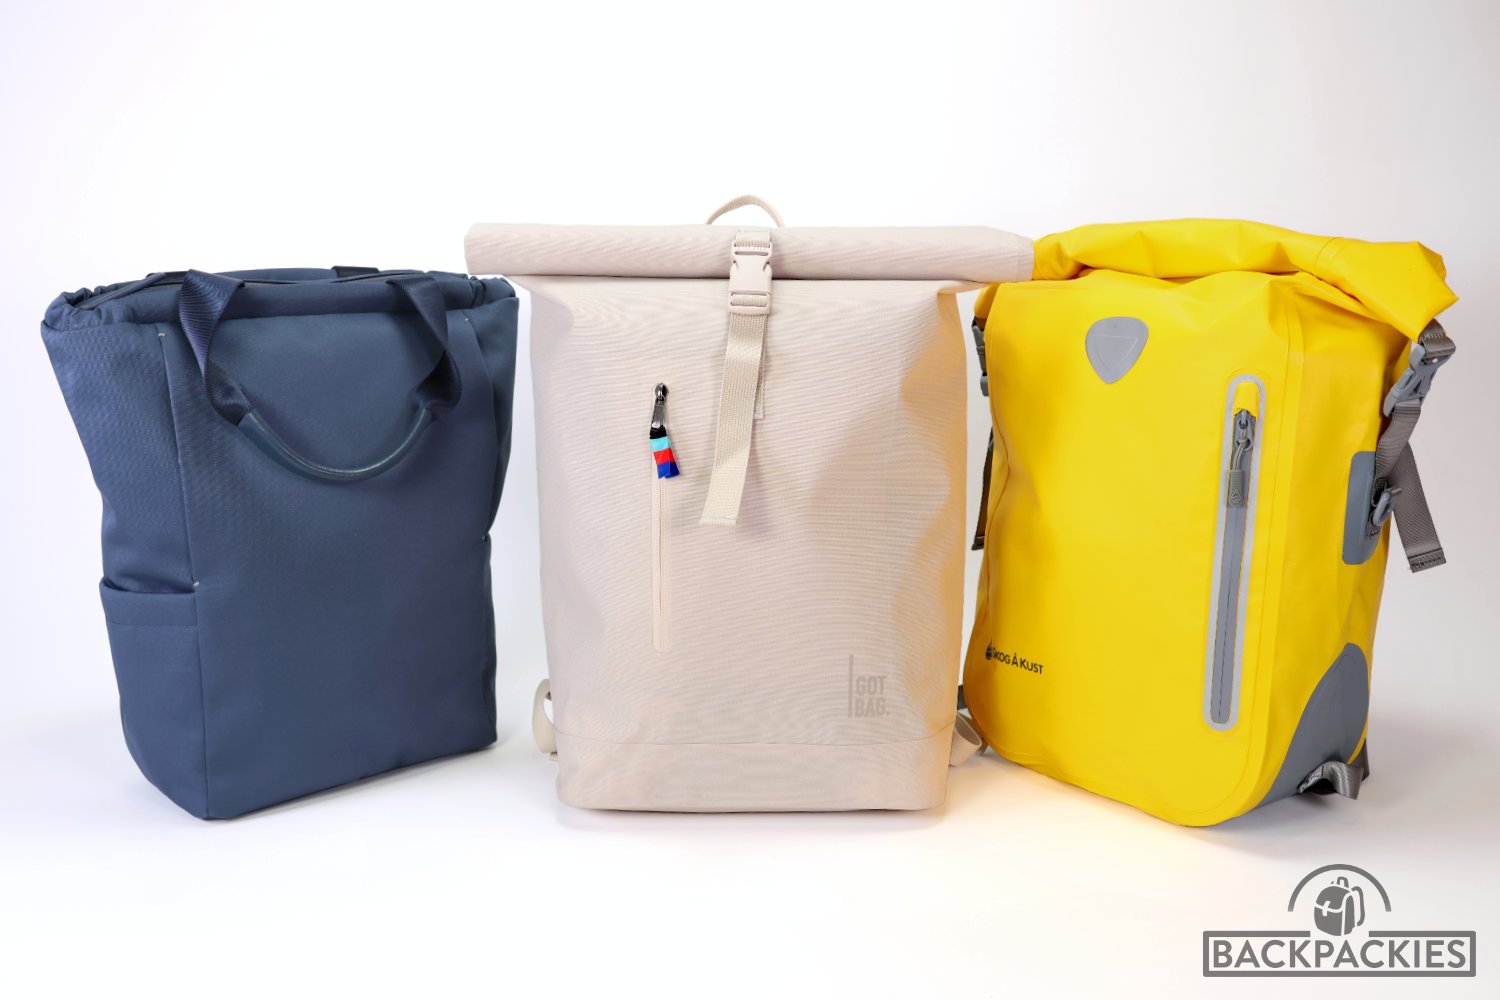 Searching for the best waterproof bag (15